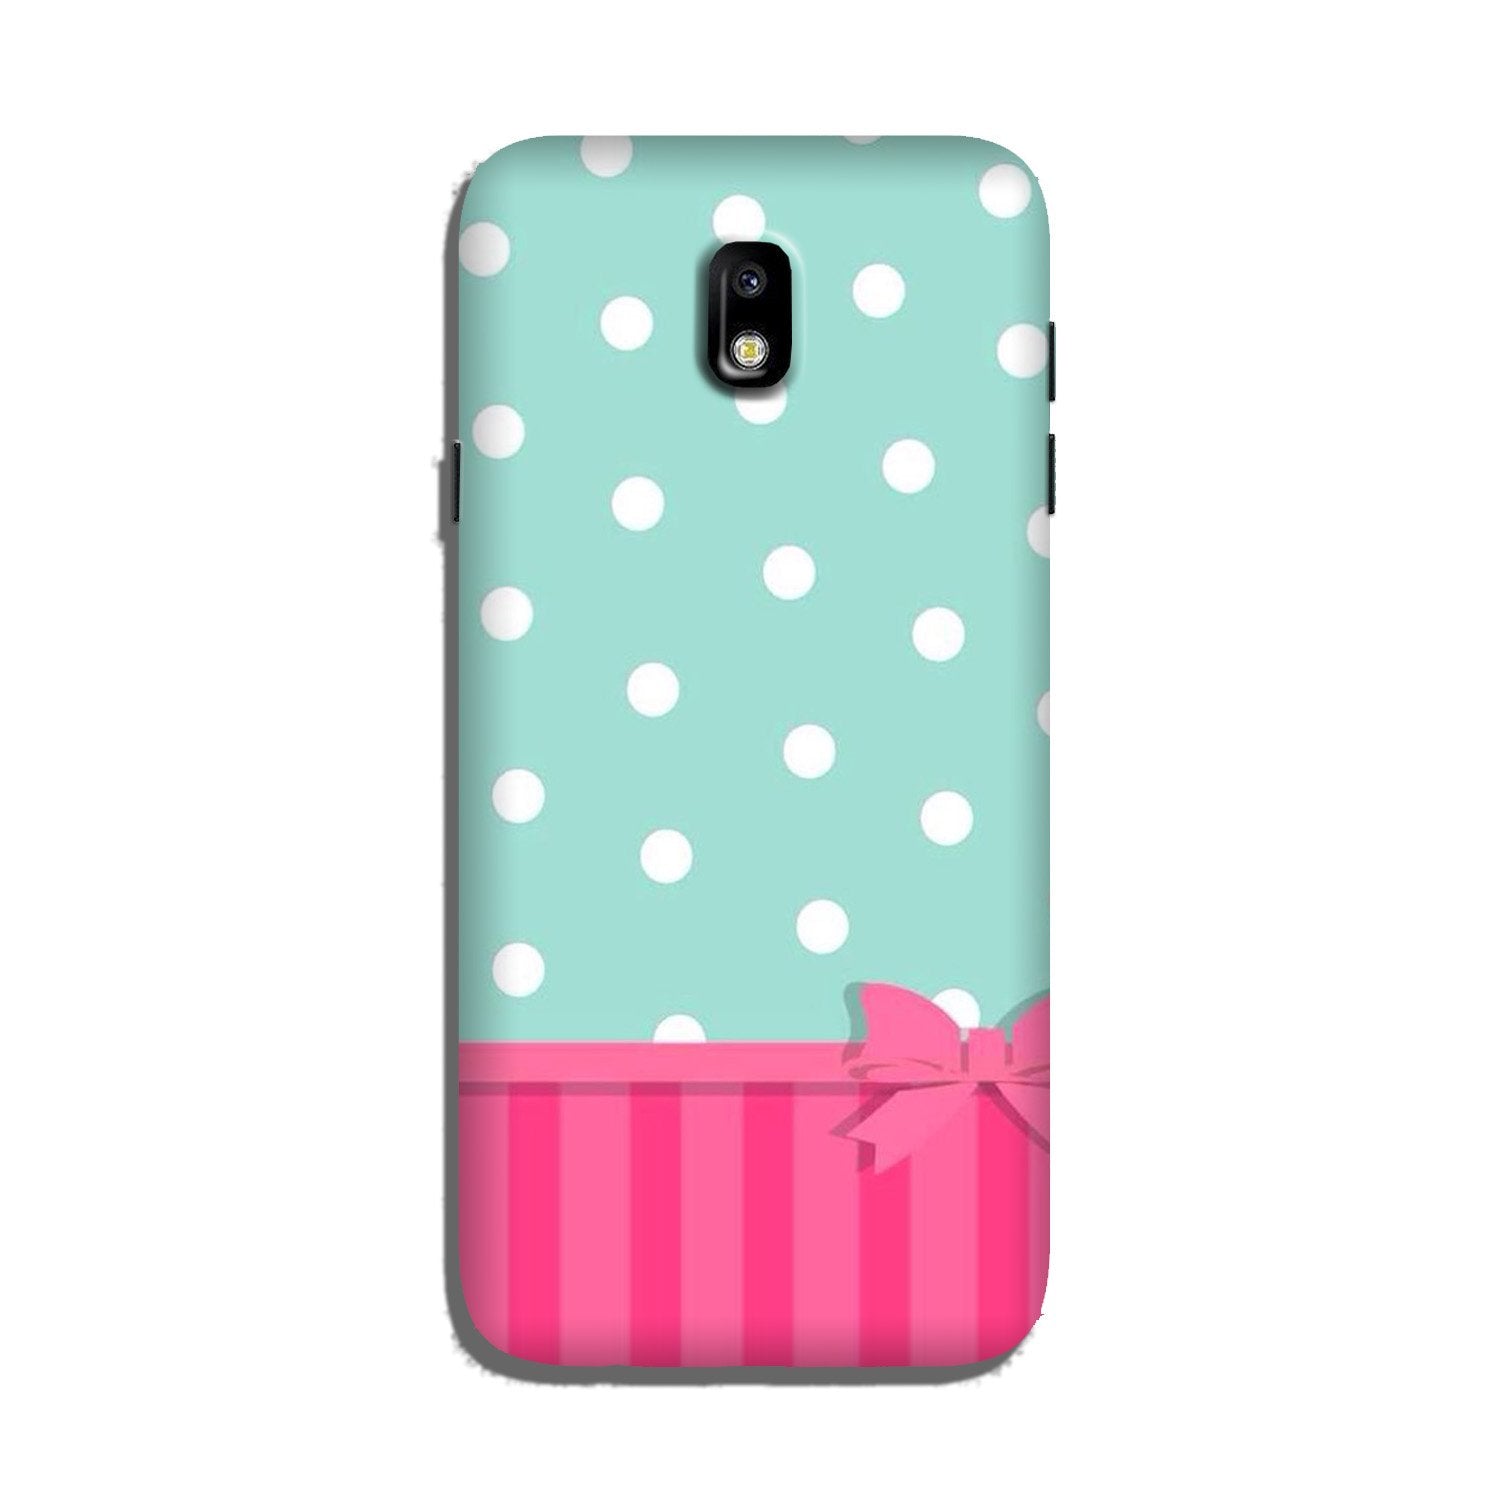 Gift Wrap Case for Galaxy J3 Pro